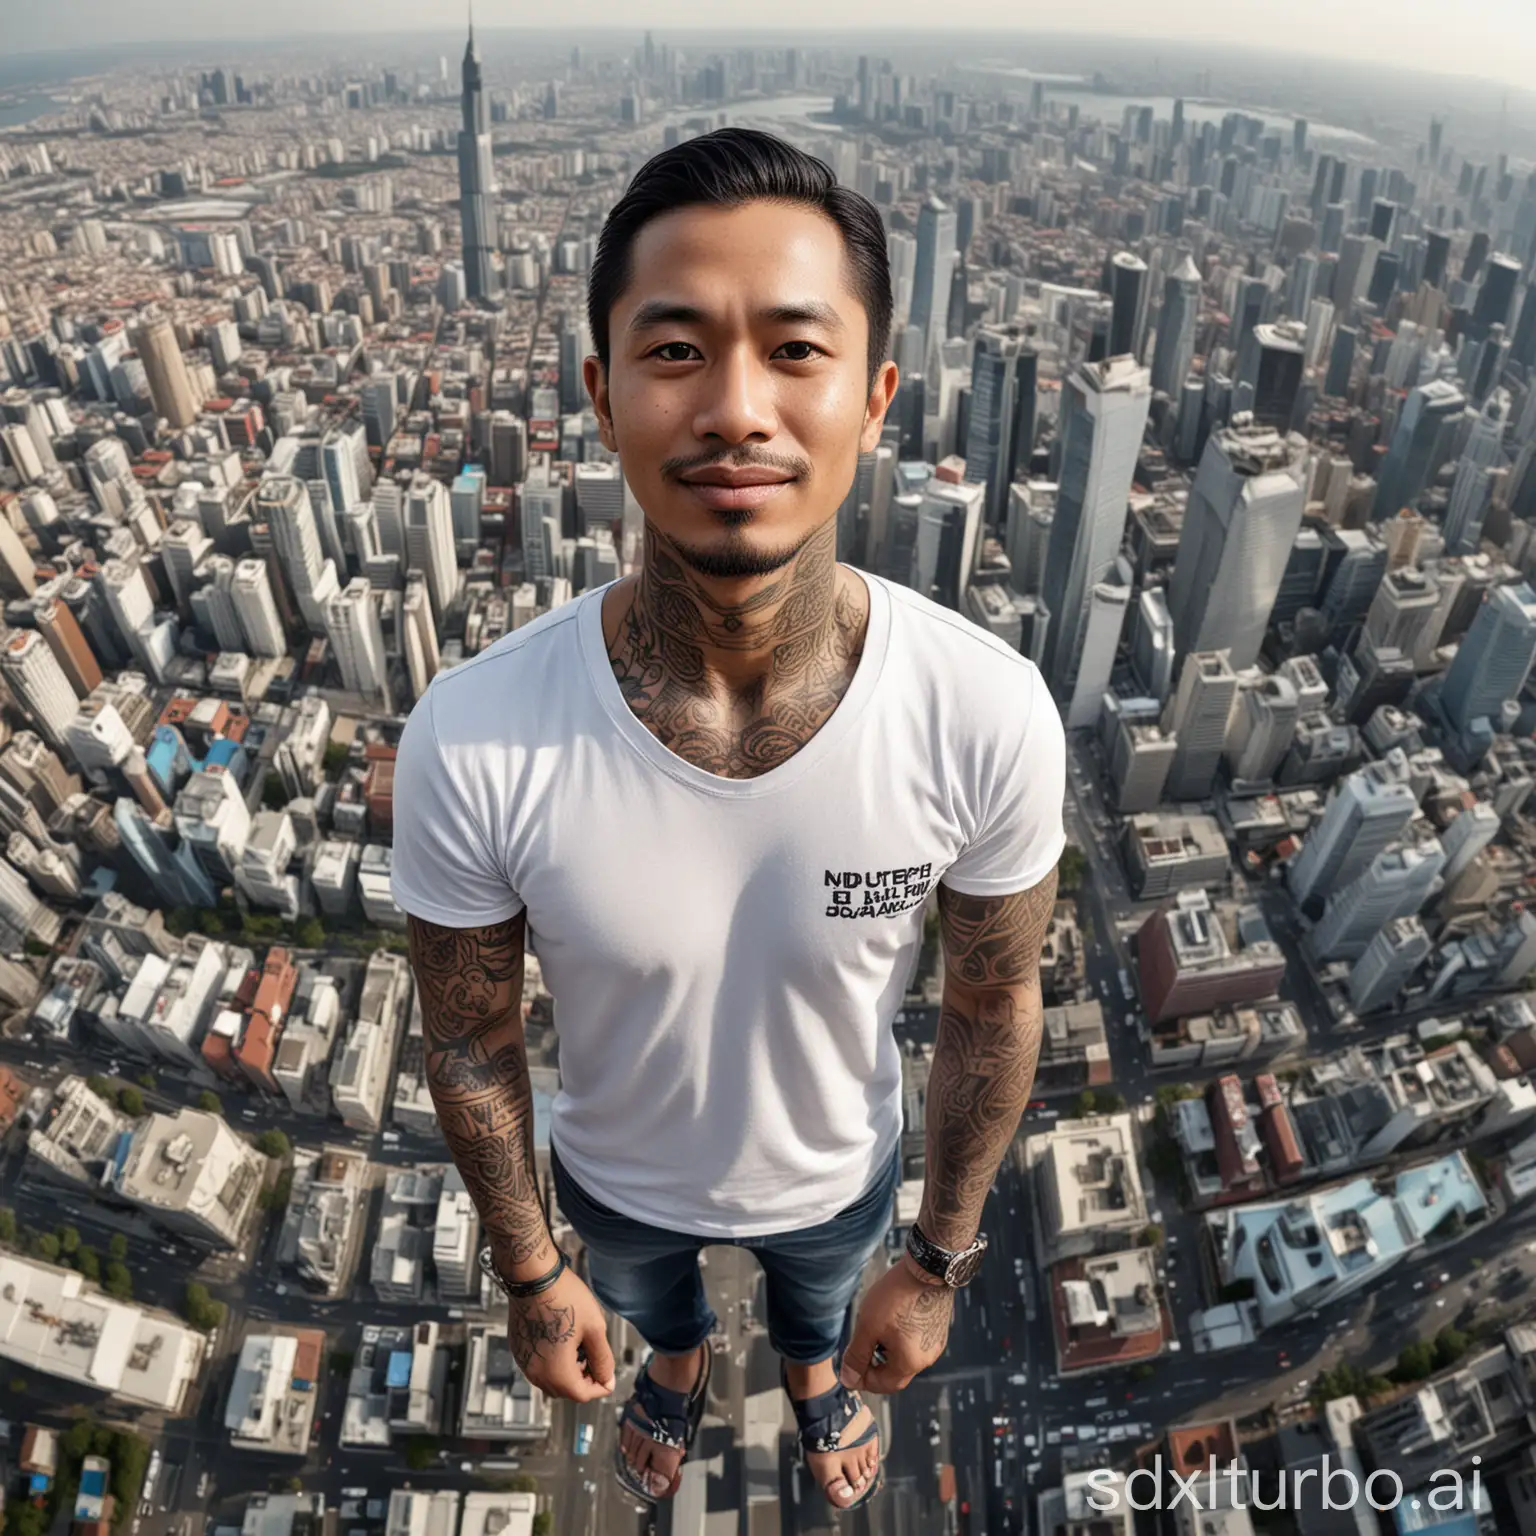  Created a hyperrealistic 4D caricature of a 35-year-old Indonesian man, long straight hair, clean face, fully tattooed arms up to his neck, wearing a white t-shirt with the text "DUGEM", short jeans, flip-flops, standing on top of the tallest building while holding the cameraman's hand. Beautiful city background, shot from above with full-frame fisheye. (No translation needed as input is in English)